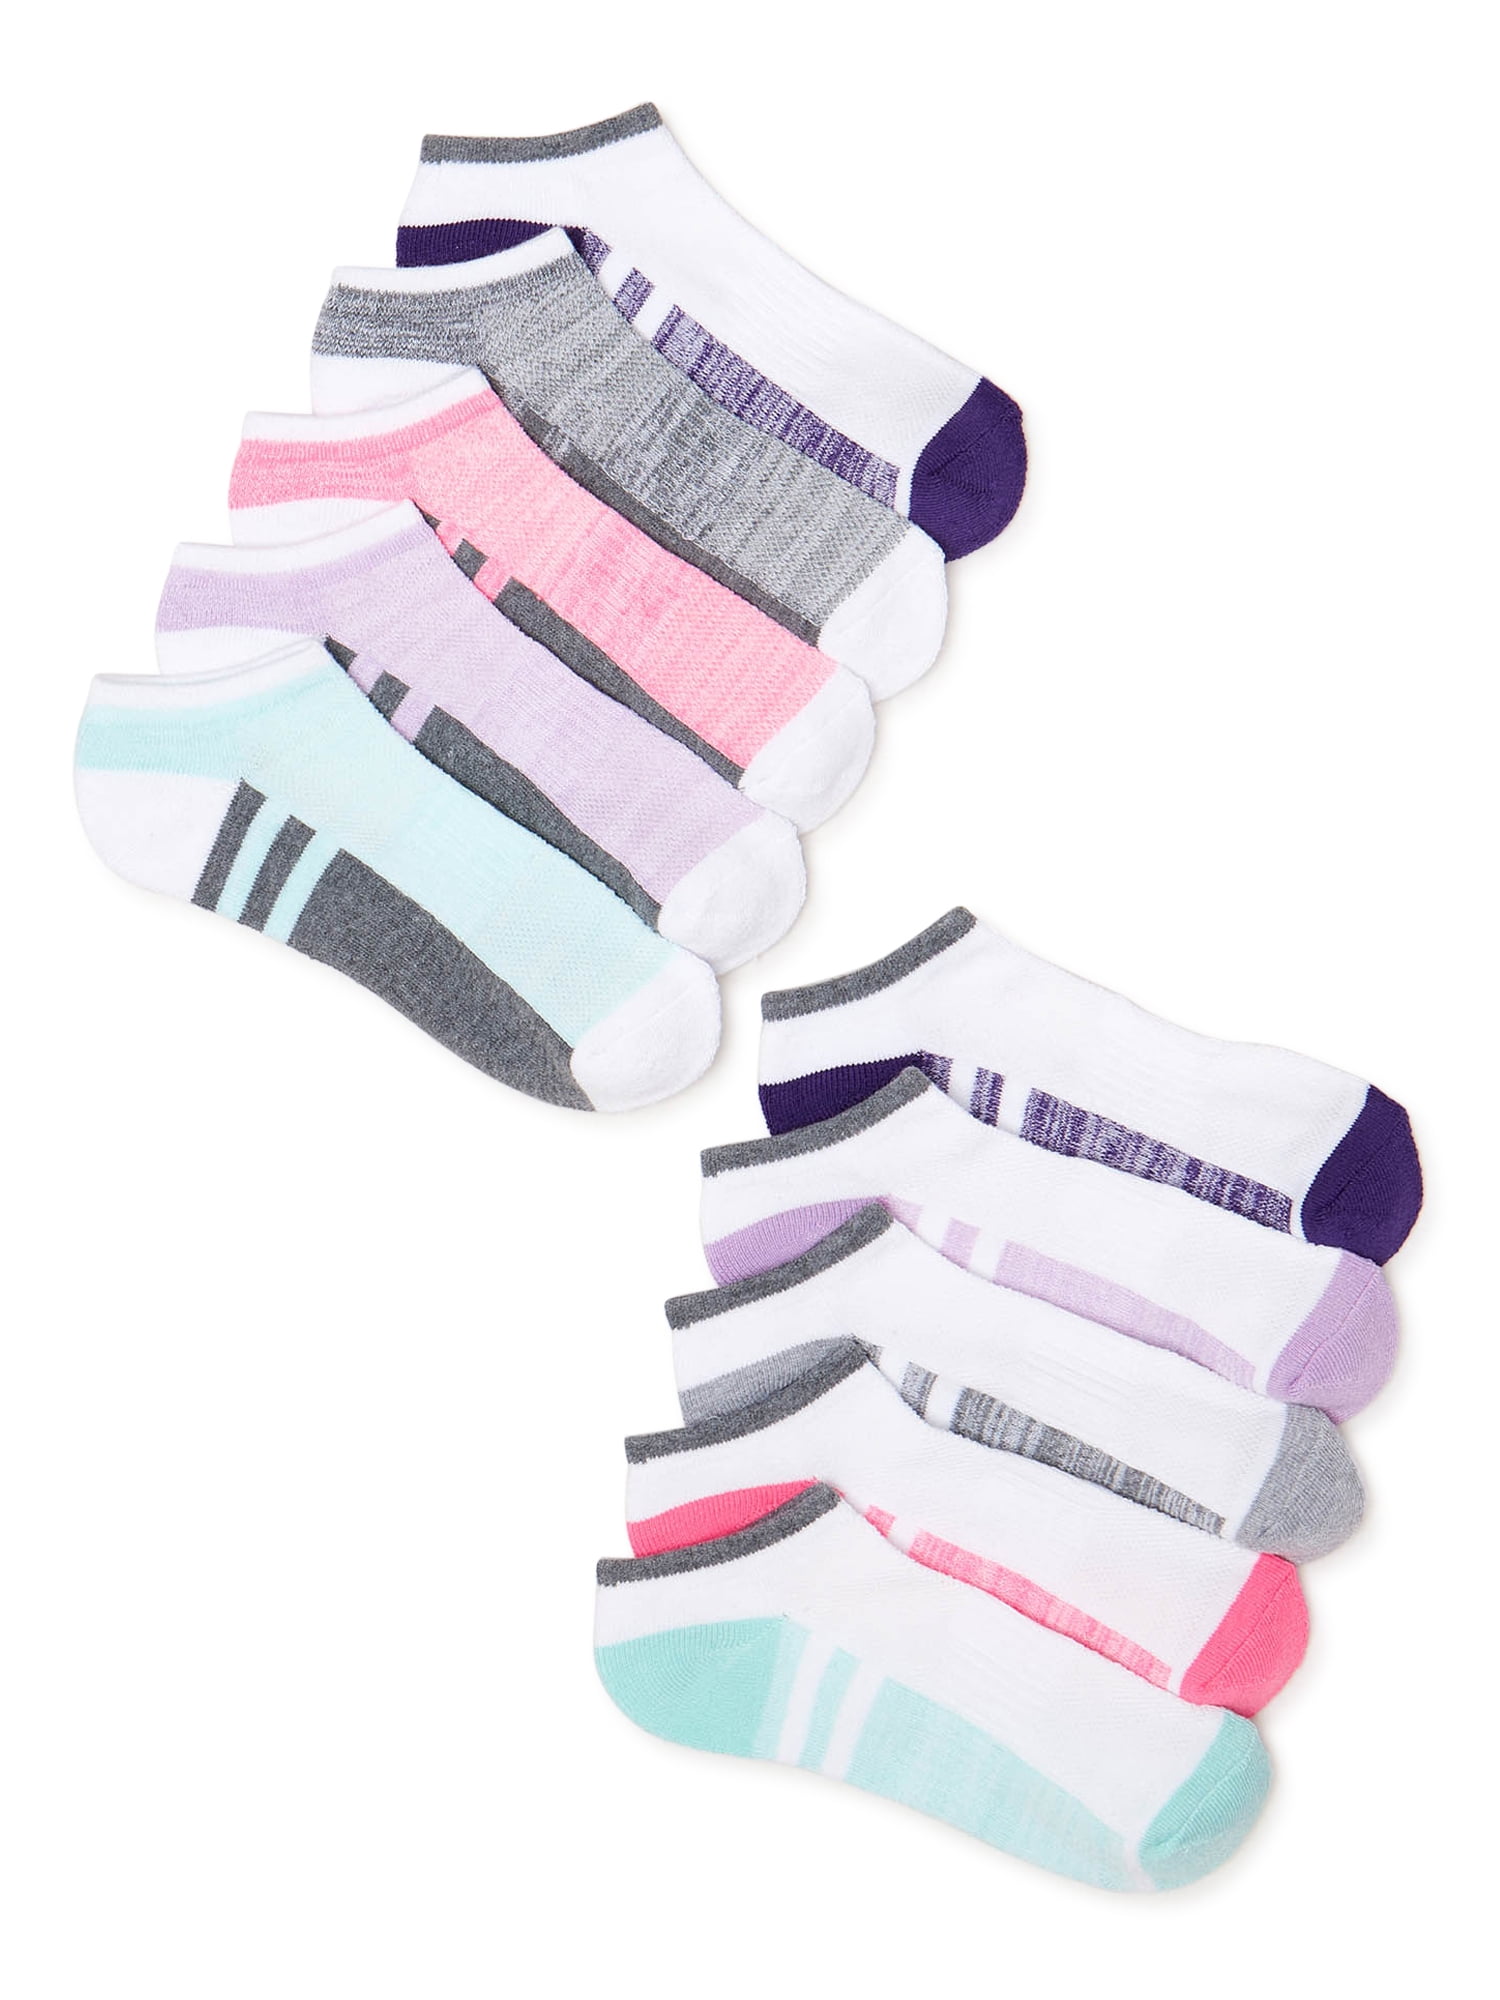 Athletic Works Girls Flat knit No Show Socks, 10-Pack, Sizes S (6-10.5 ...